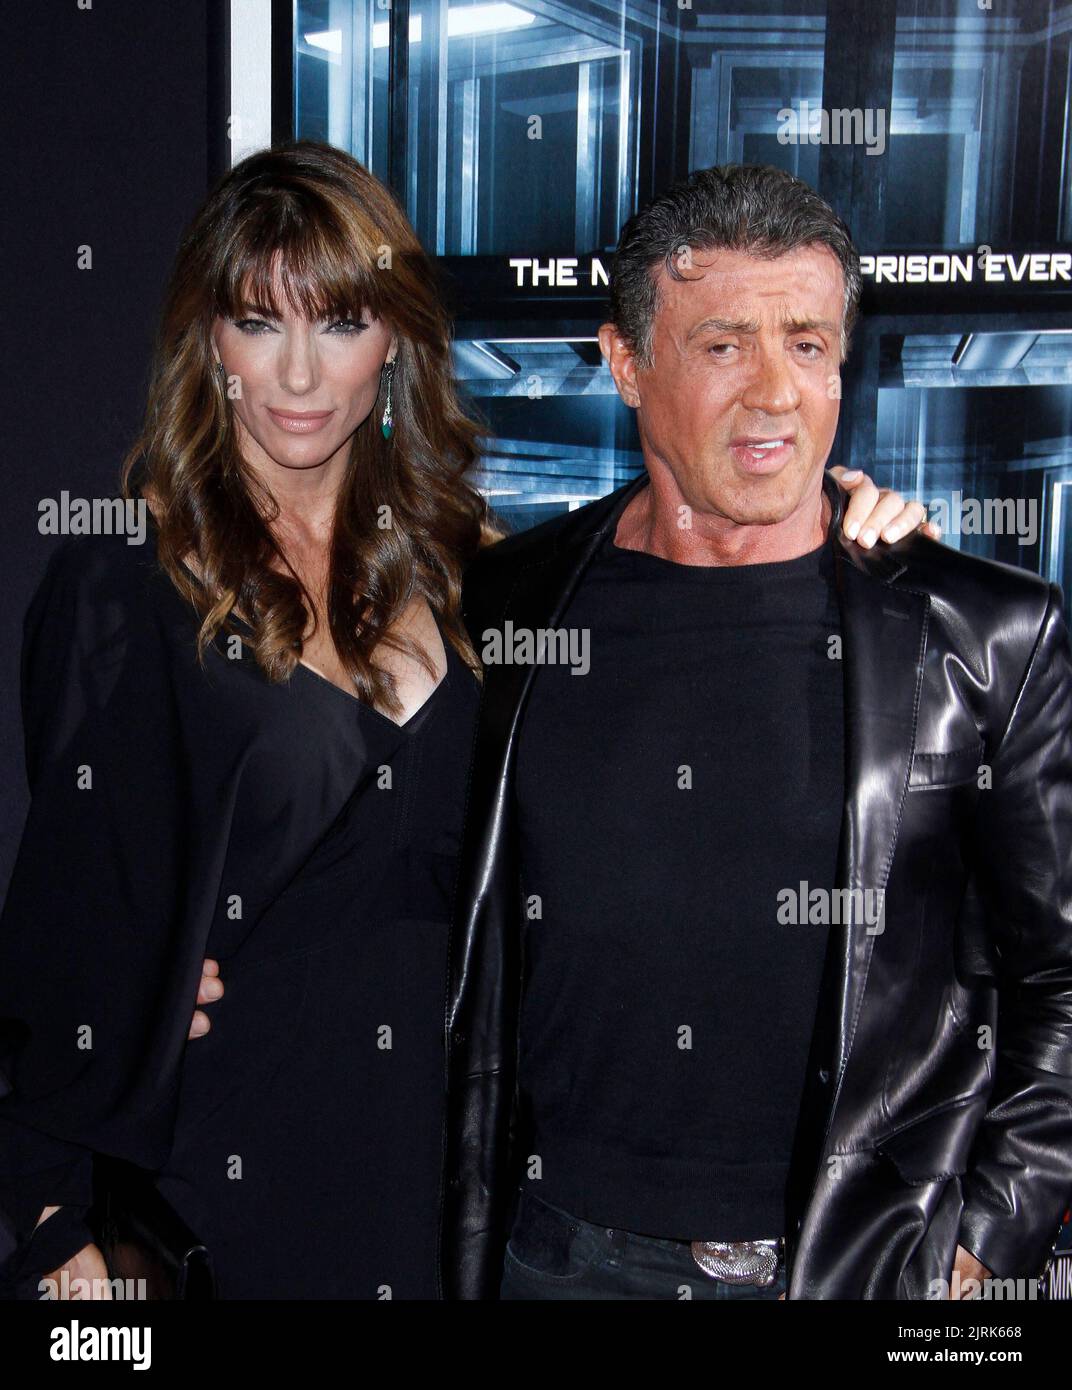 File photo dated October 15, 2013 of Jennifer Flavin and Sylvester Stallone attend the 'Escape Plan' screening at the Regal Theater on 42nd Street in New York City, NY, USA. Sylvester Stallone and Jennifer Flavin are divorcing after 25 years of marriage. Flavin filed a petition "for dissolution of marriage and other relief" from the Rocky actor, 76, on Friday at a court in Palm Beach County, Florida. Stallone and Flavin, 54, married in 1997, though their relationship originally began in 1988 at a restaurant in Beverly Hills, California. Photo by Donna Ward/ABACAPRESS.COM Stock Photo